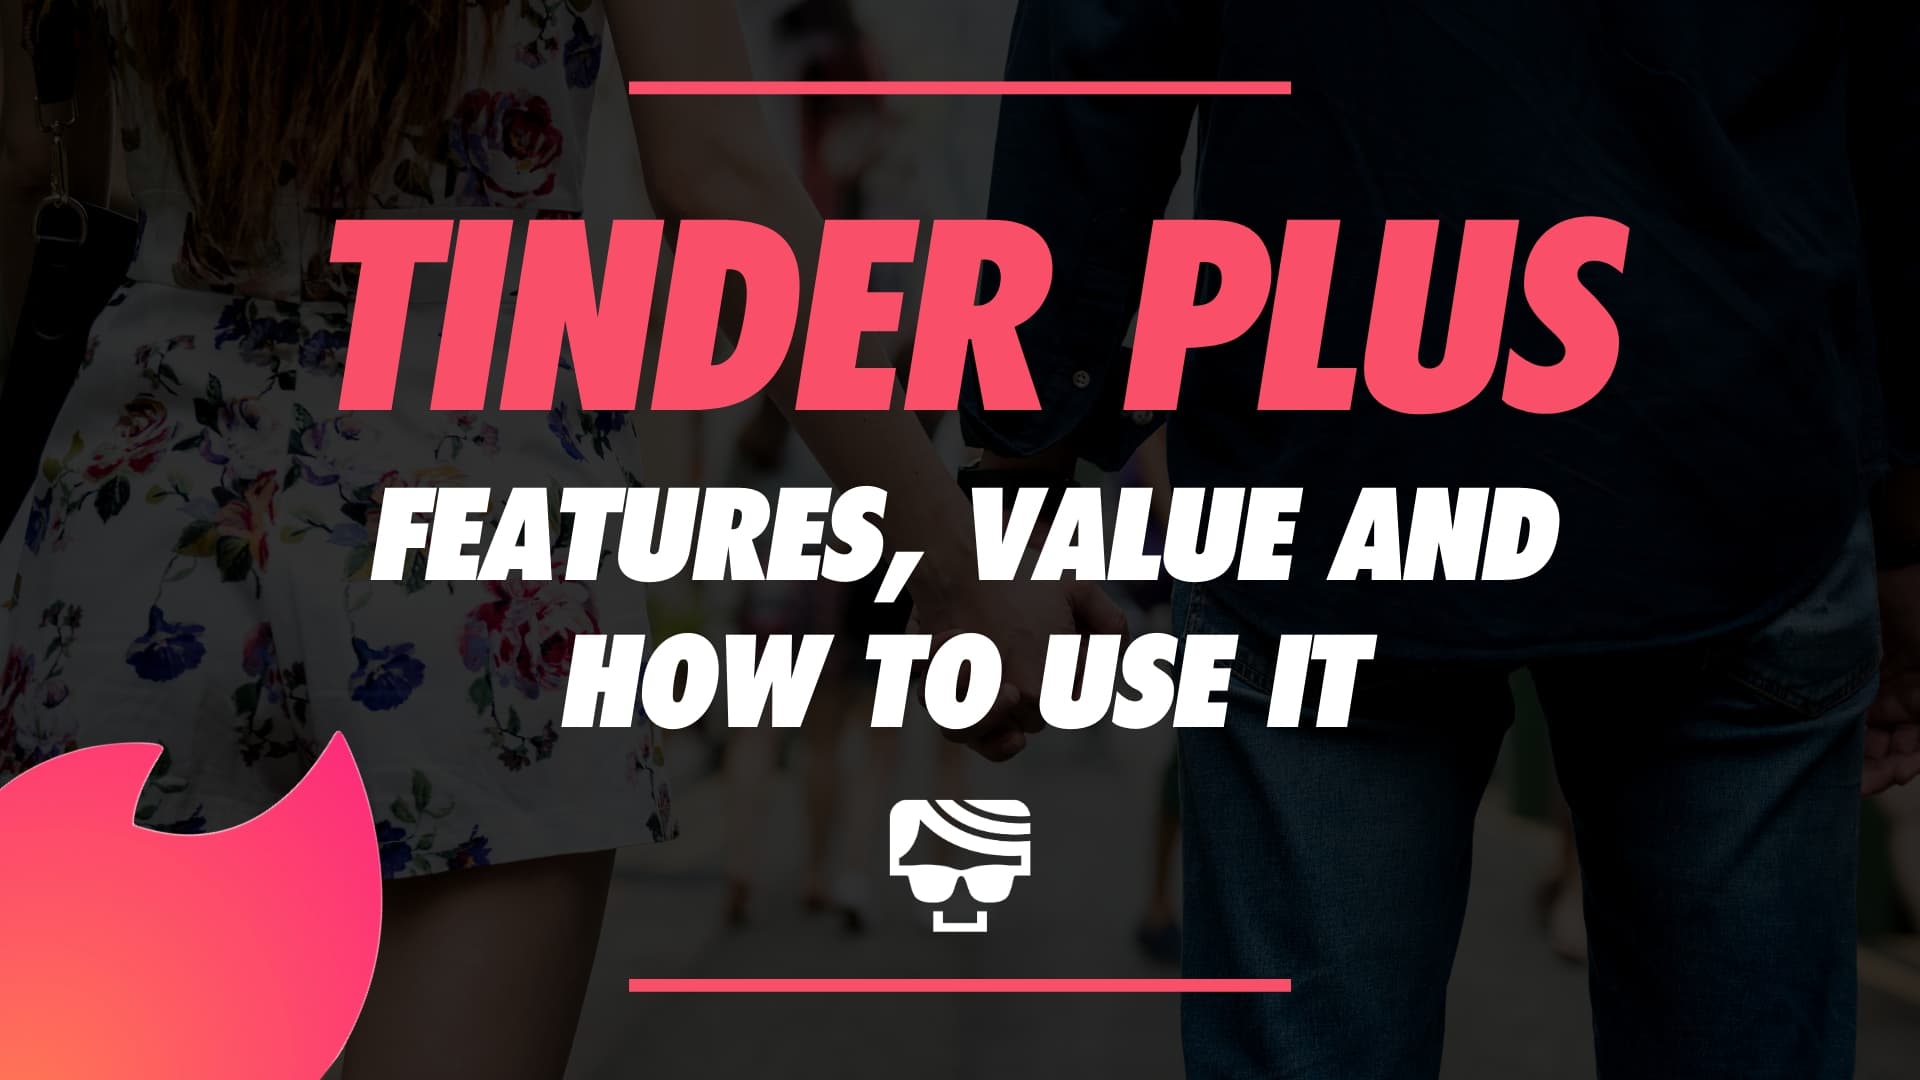 tinder plus features, is it worth it?